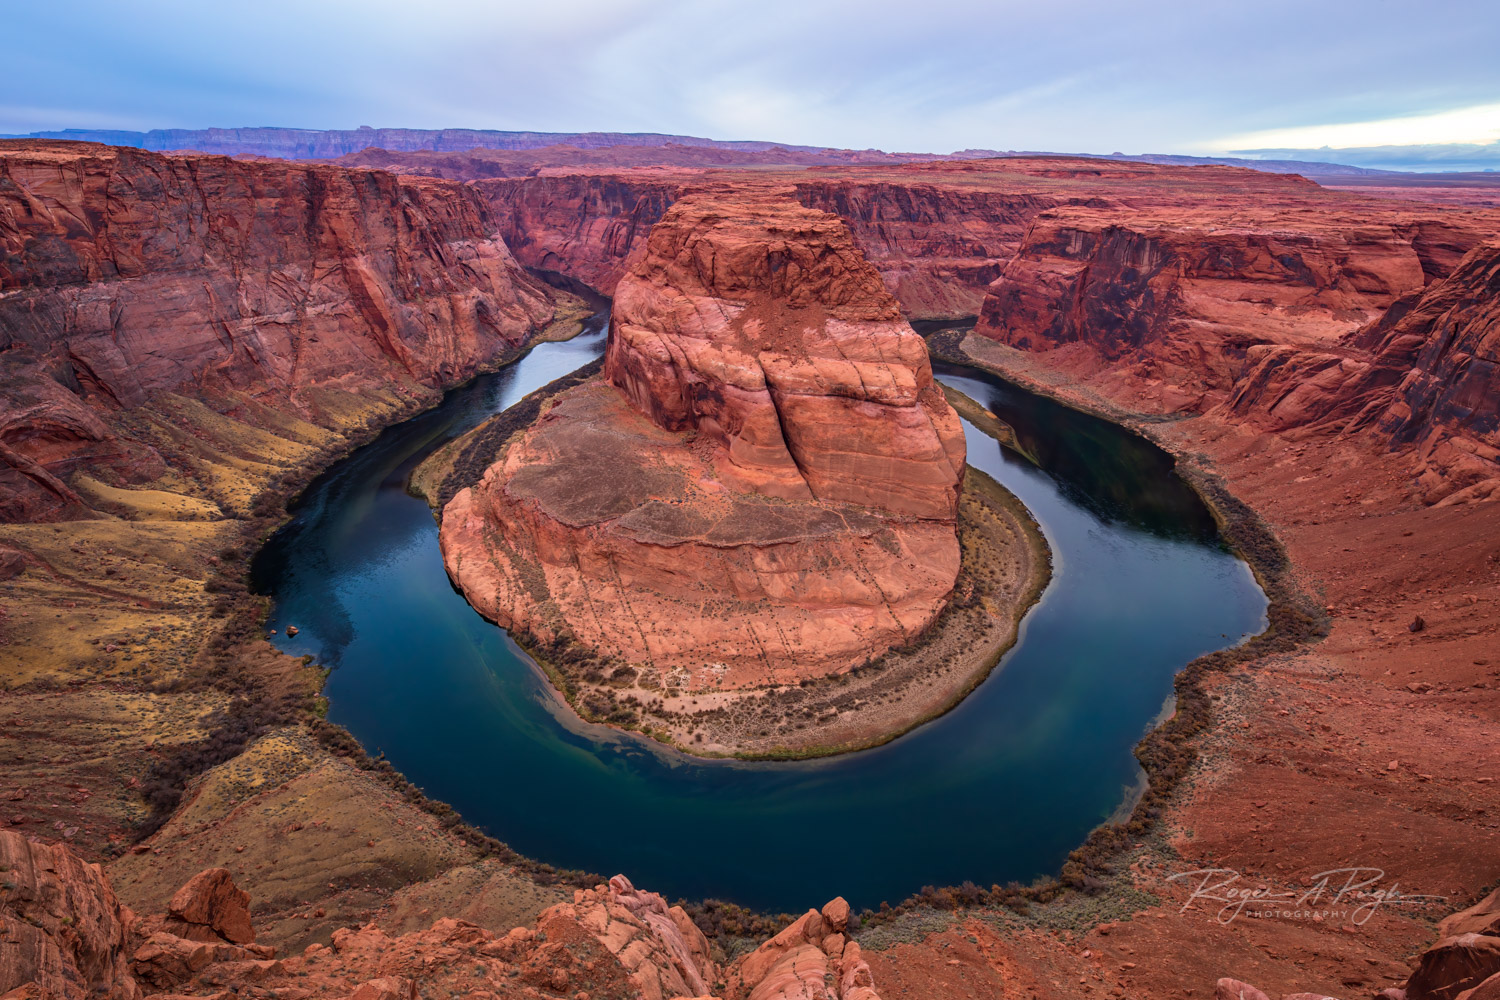 Horseshoe Bend is a fantastic landmark. The Navajo Nation has done a great job developing the view points as well as the rest...